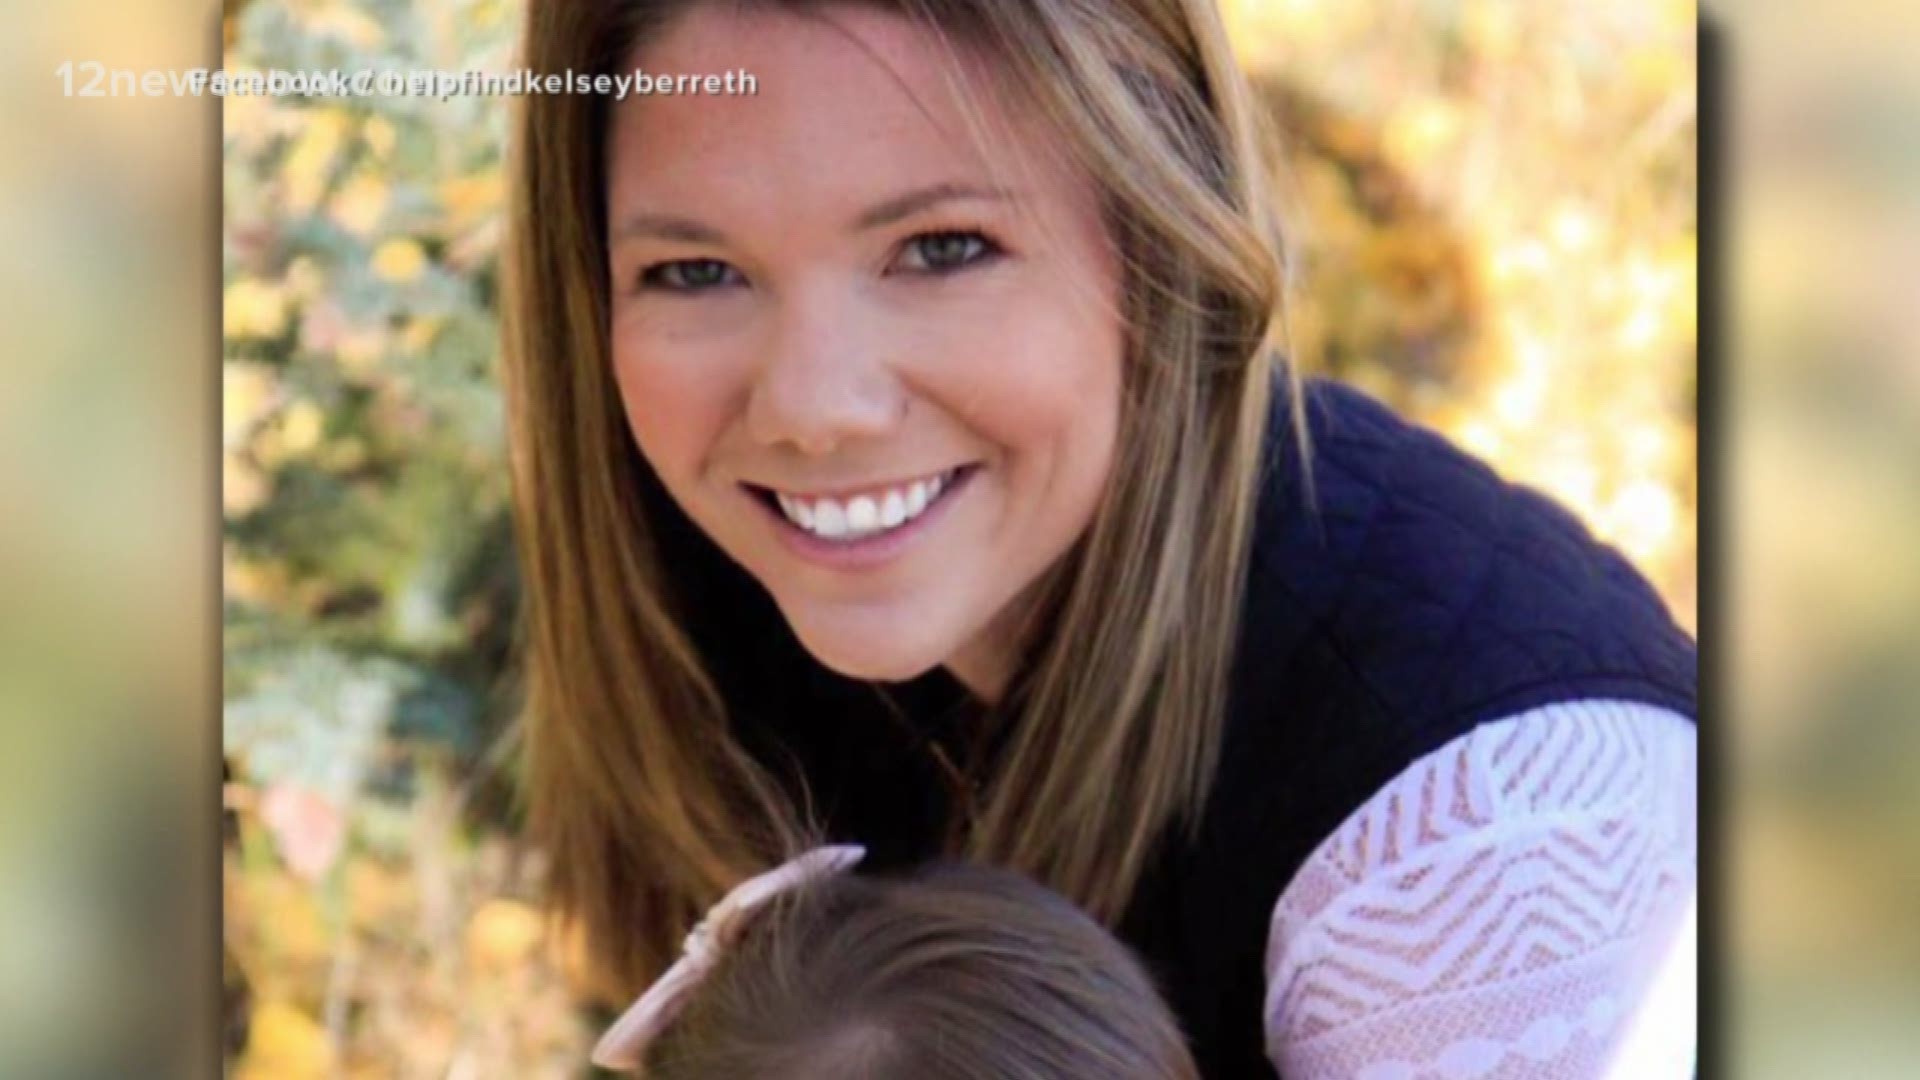 Husband Of Missing Colorado Woman To Appear In Court For First Degree Murder Charge